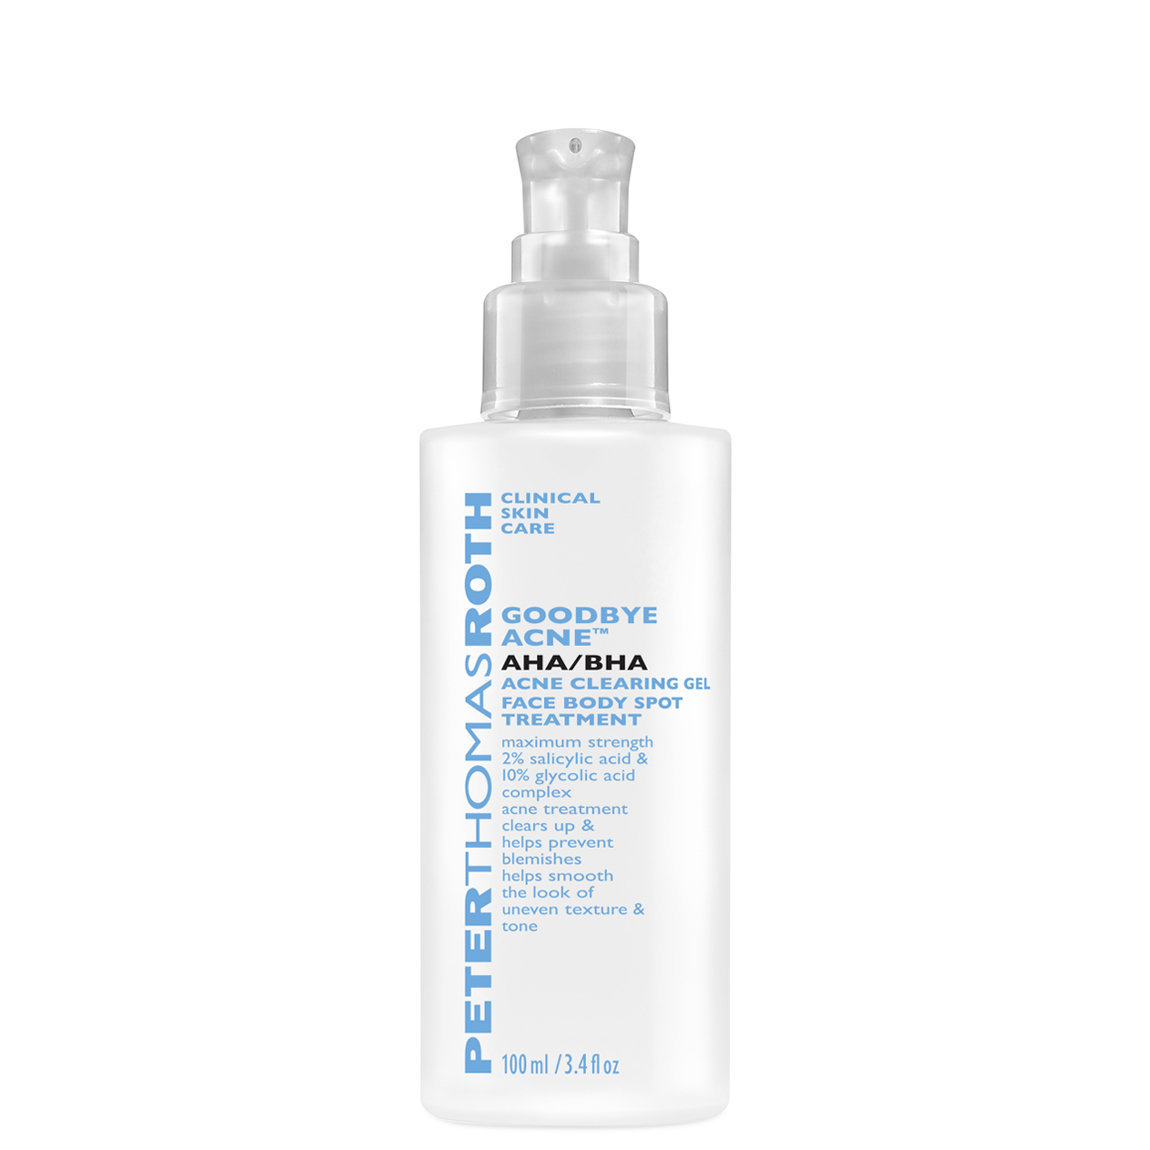 Peter Thomas Roth Goodbye Acne AHA/BHA Clearing Gel 100 ml alternative view 1 - product swatch.